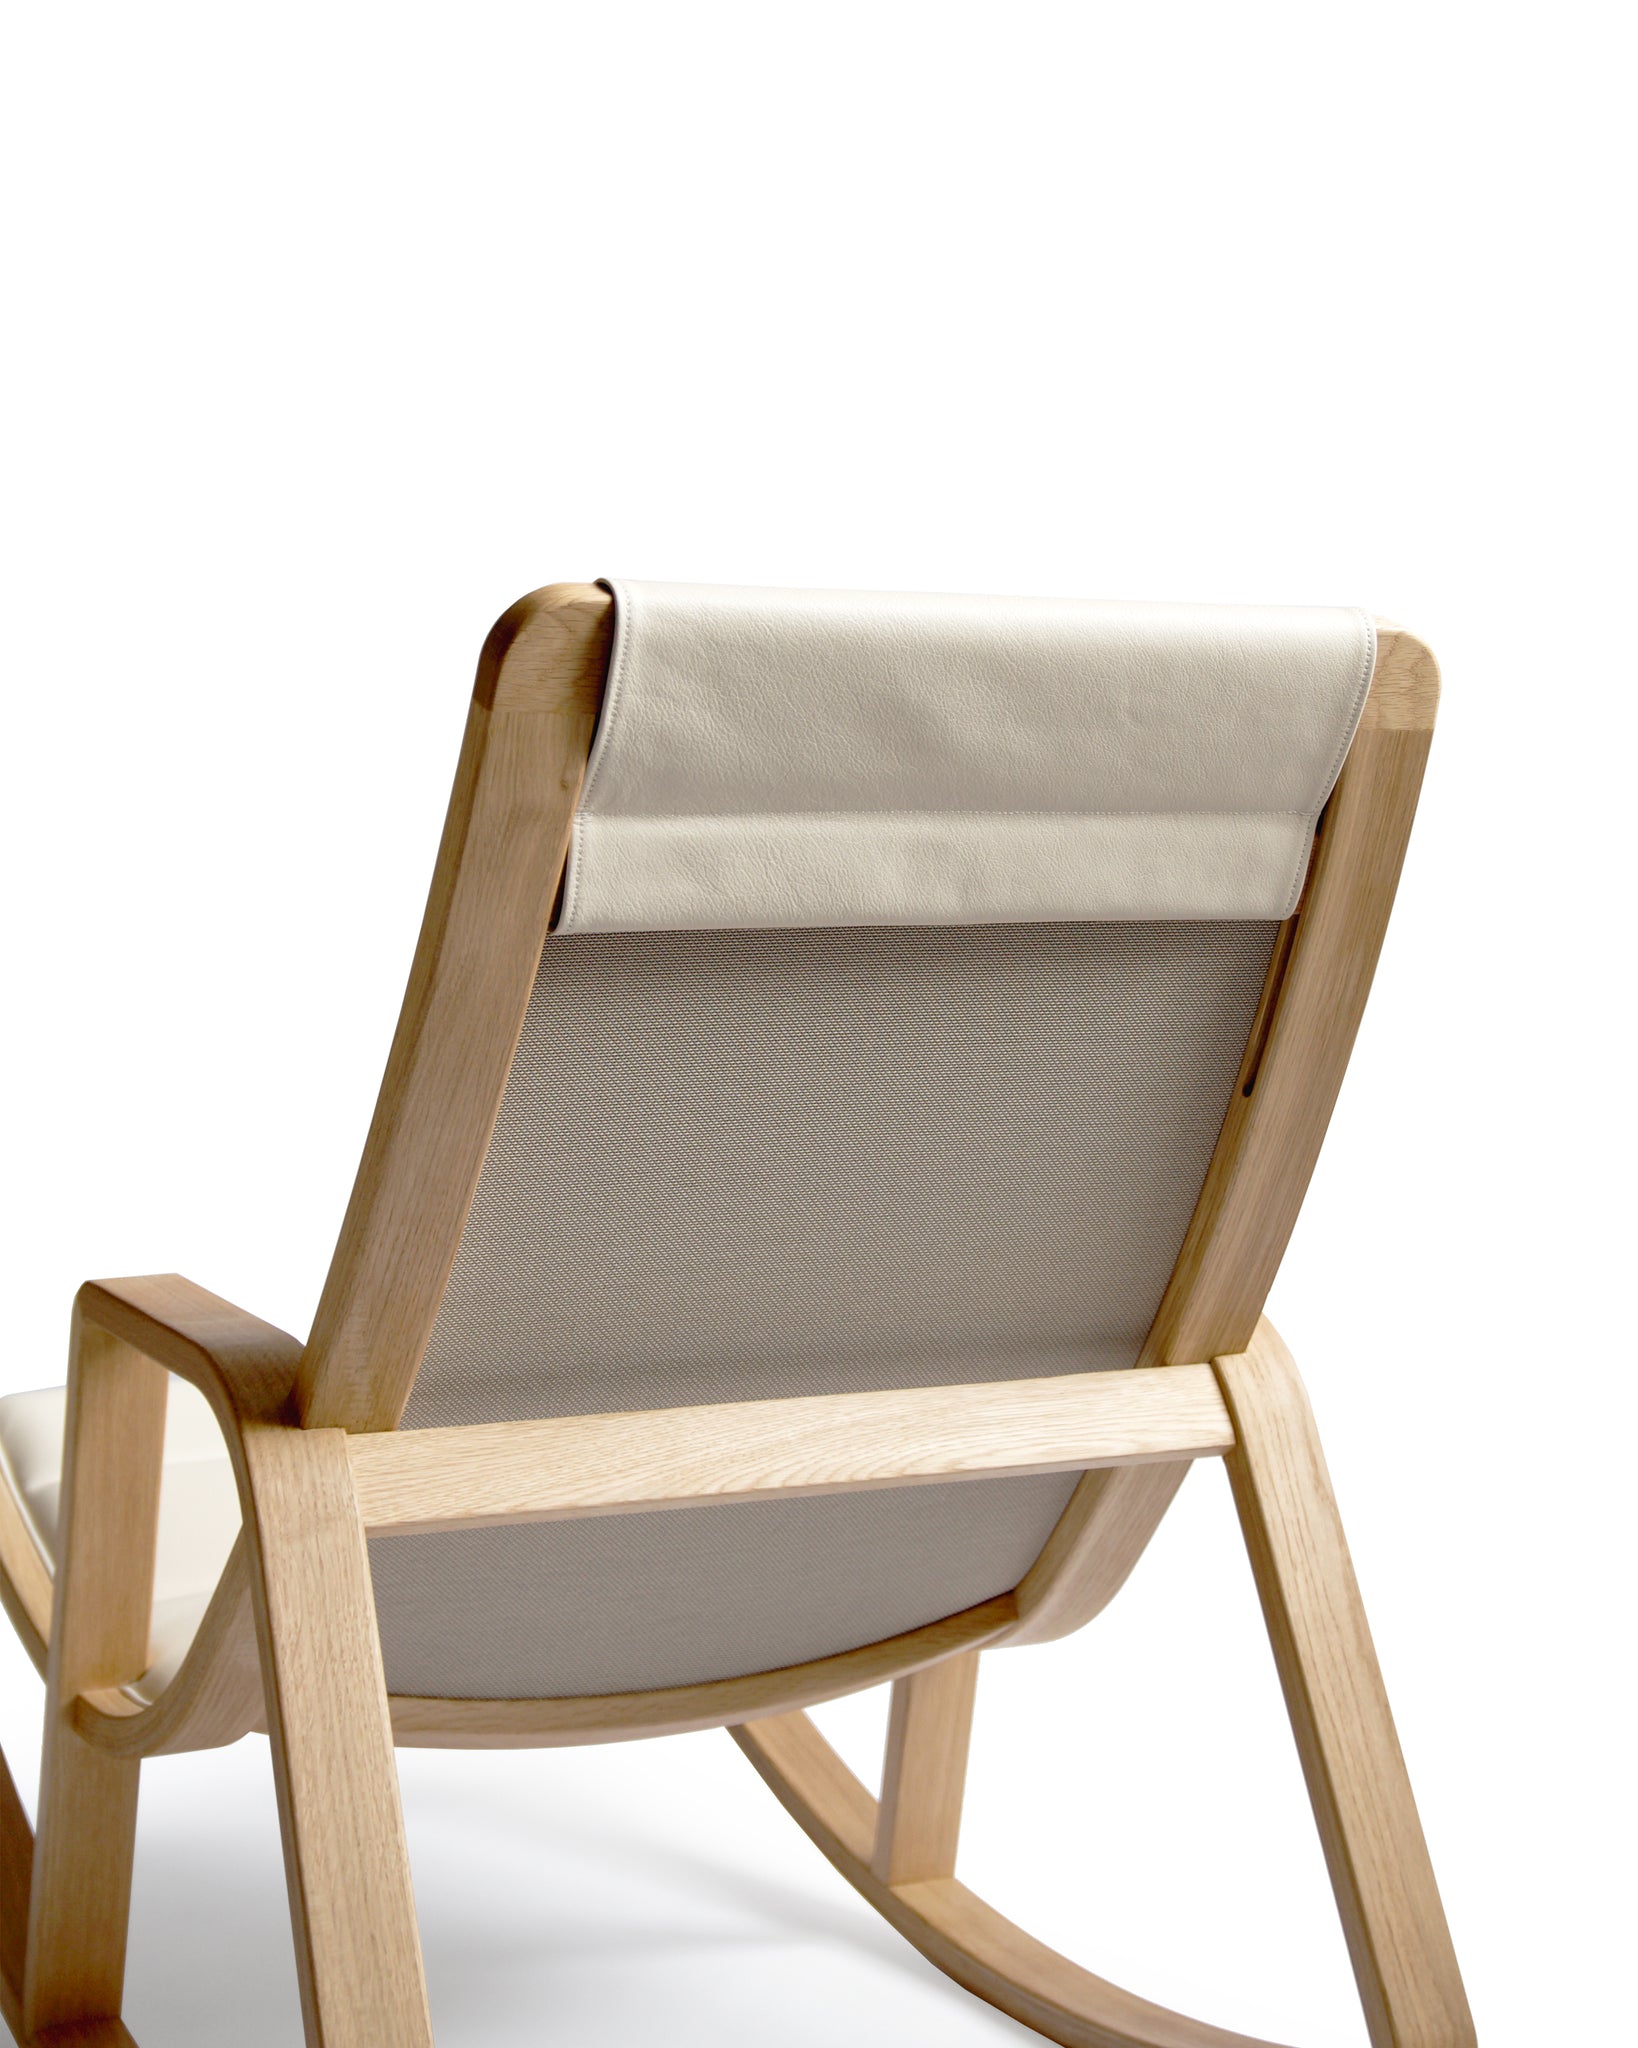 Cropped detail image showing the back of tonton rocking chair. Adjustable neck pillow is shown.